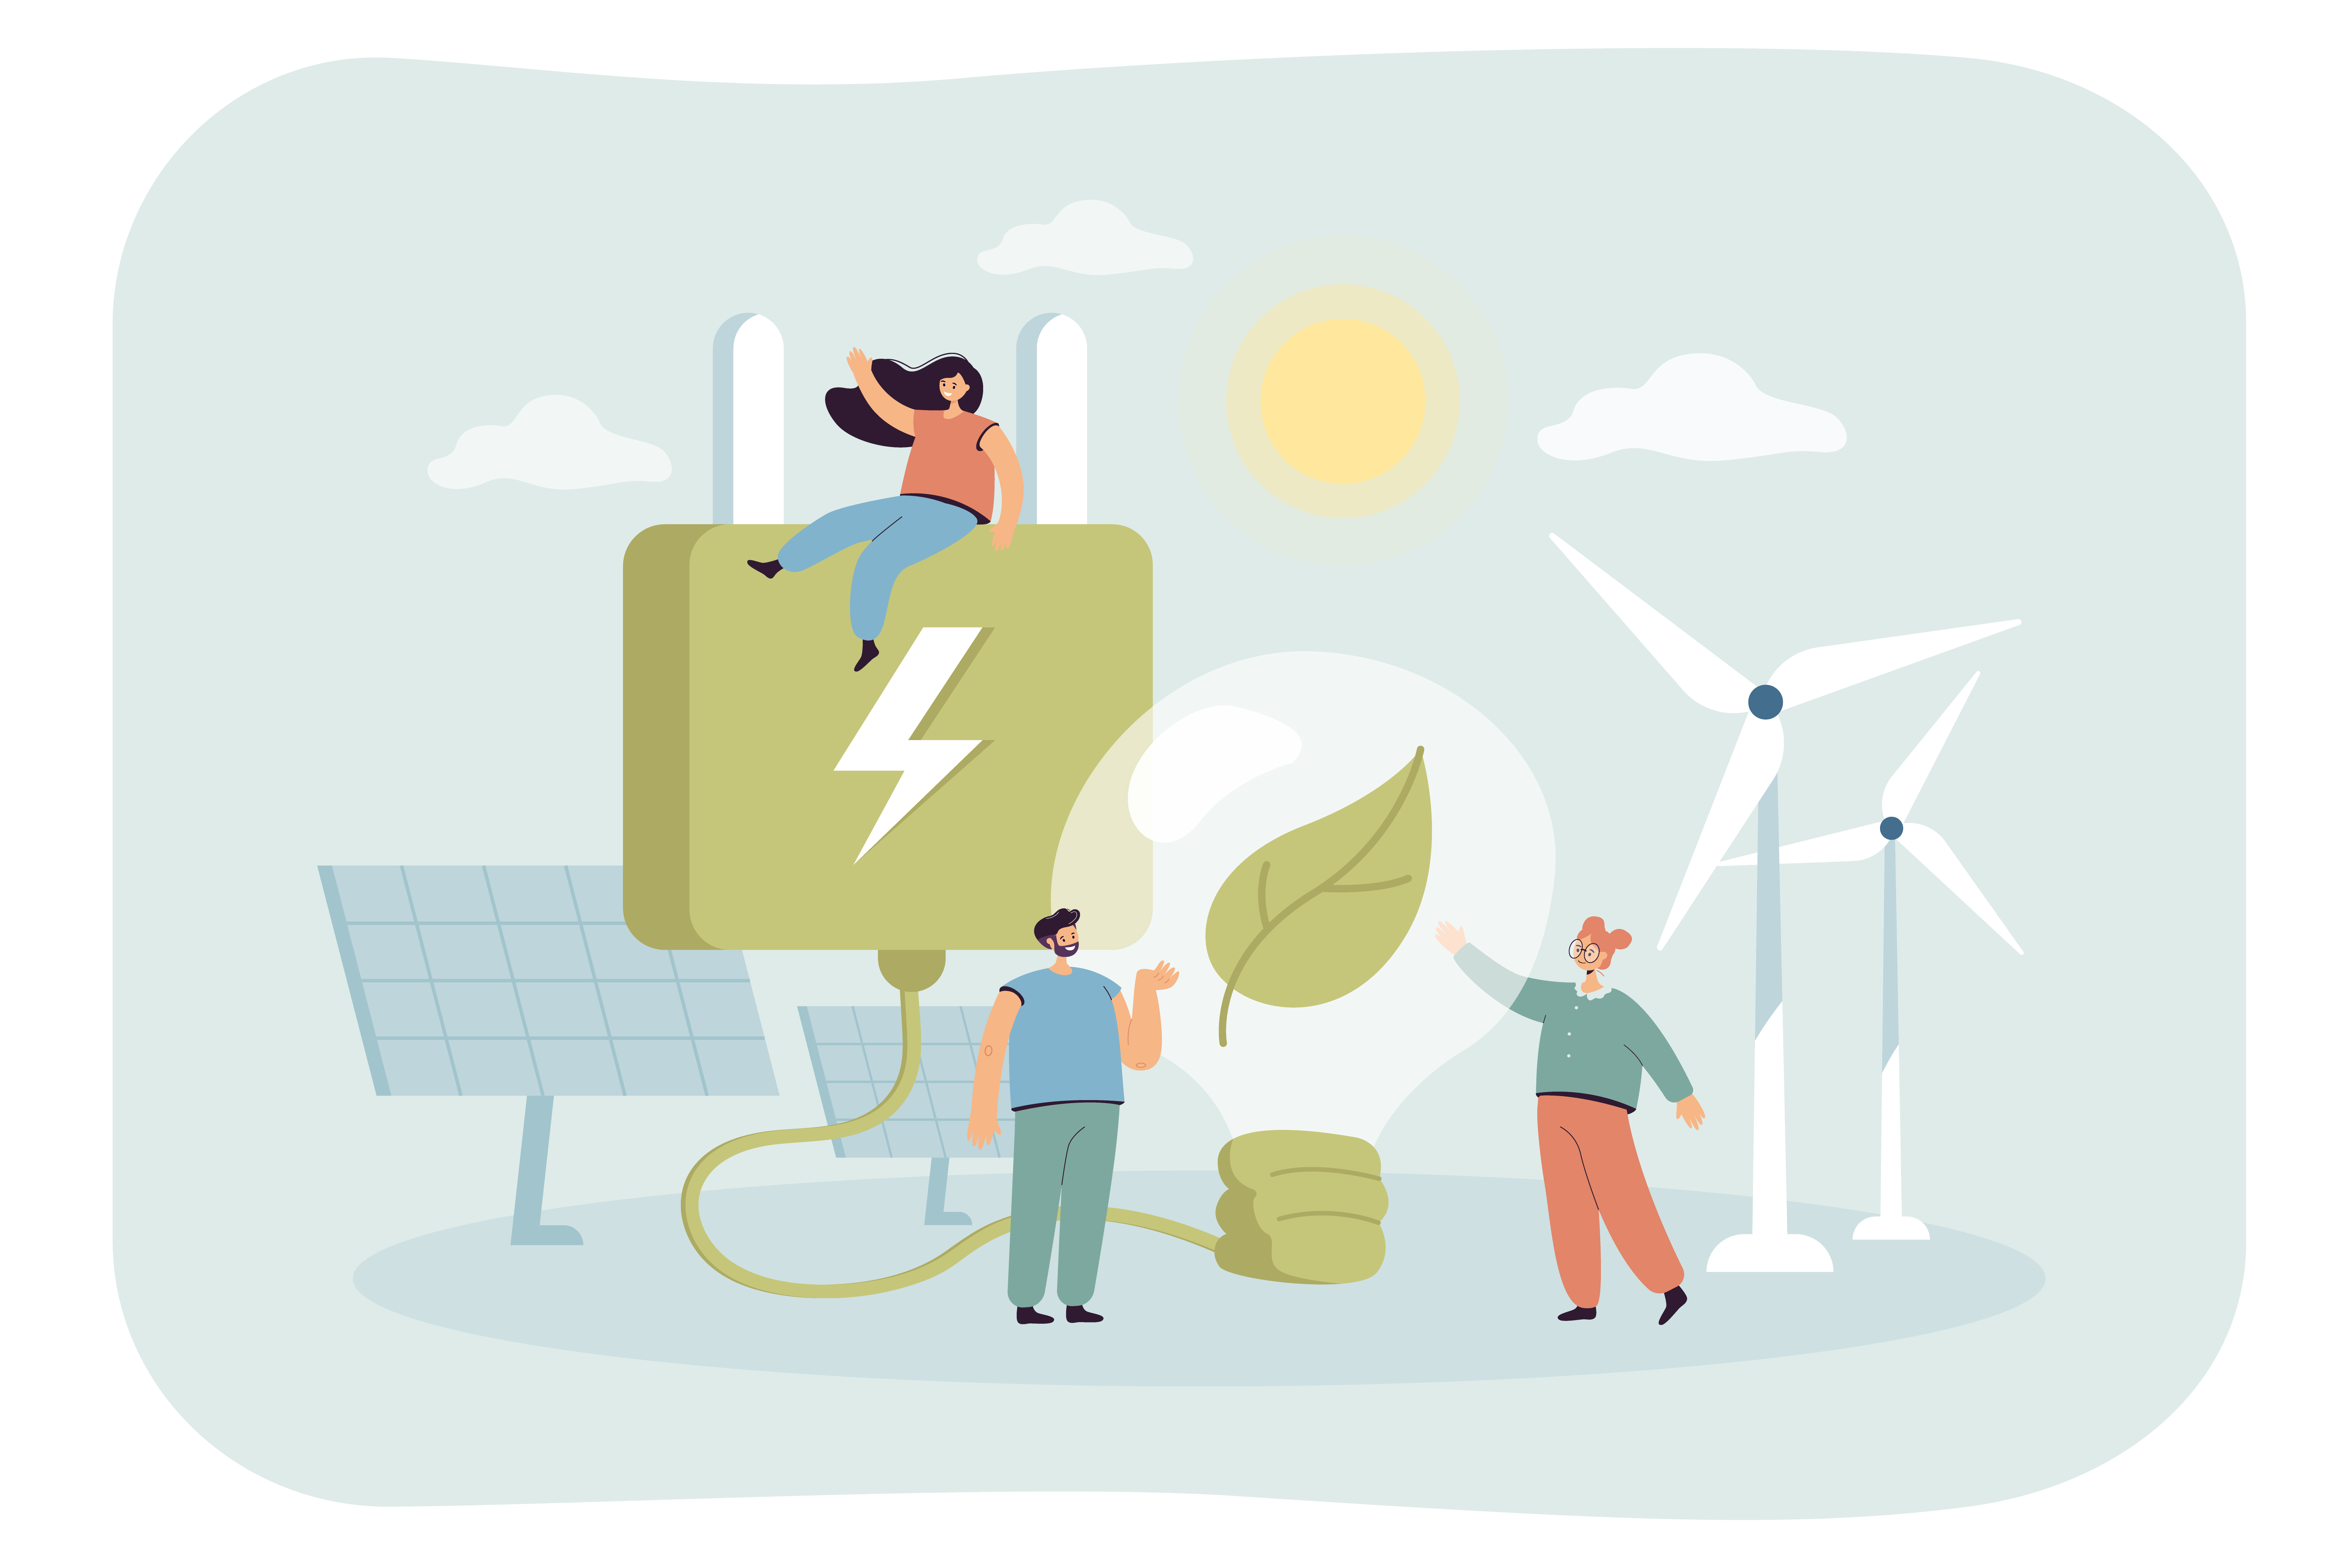 Tiny characters in village with windmills and solar panels. Save planet, people with eco-friendly lifestyle flat vector illustration. Sustainable or renewable energy, technology concept for banner